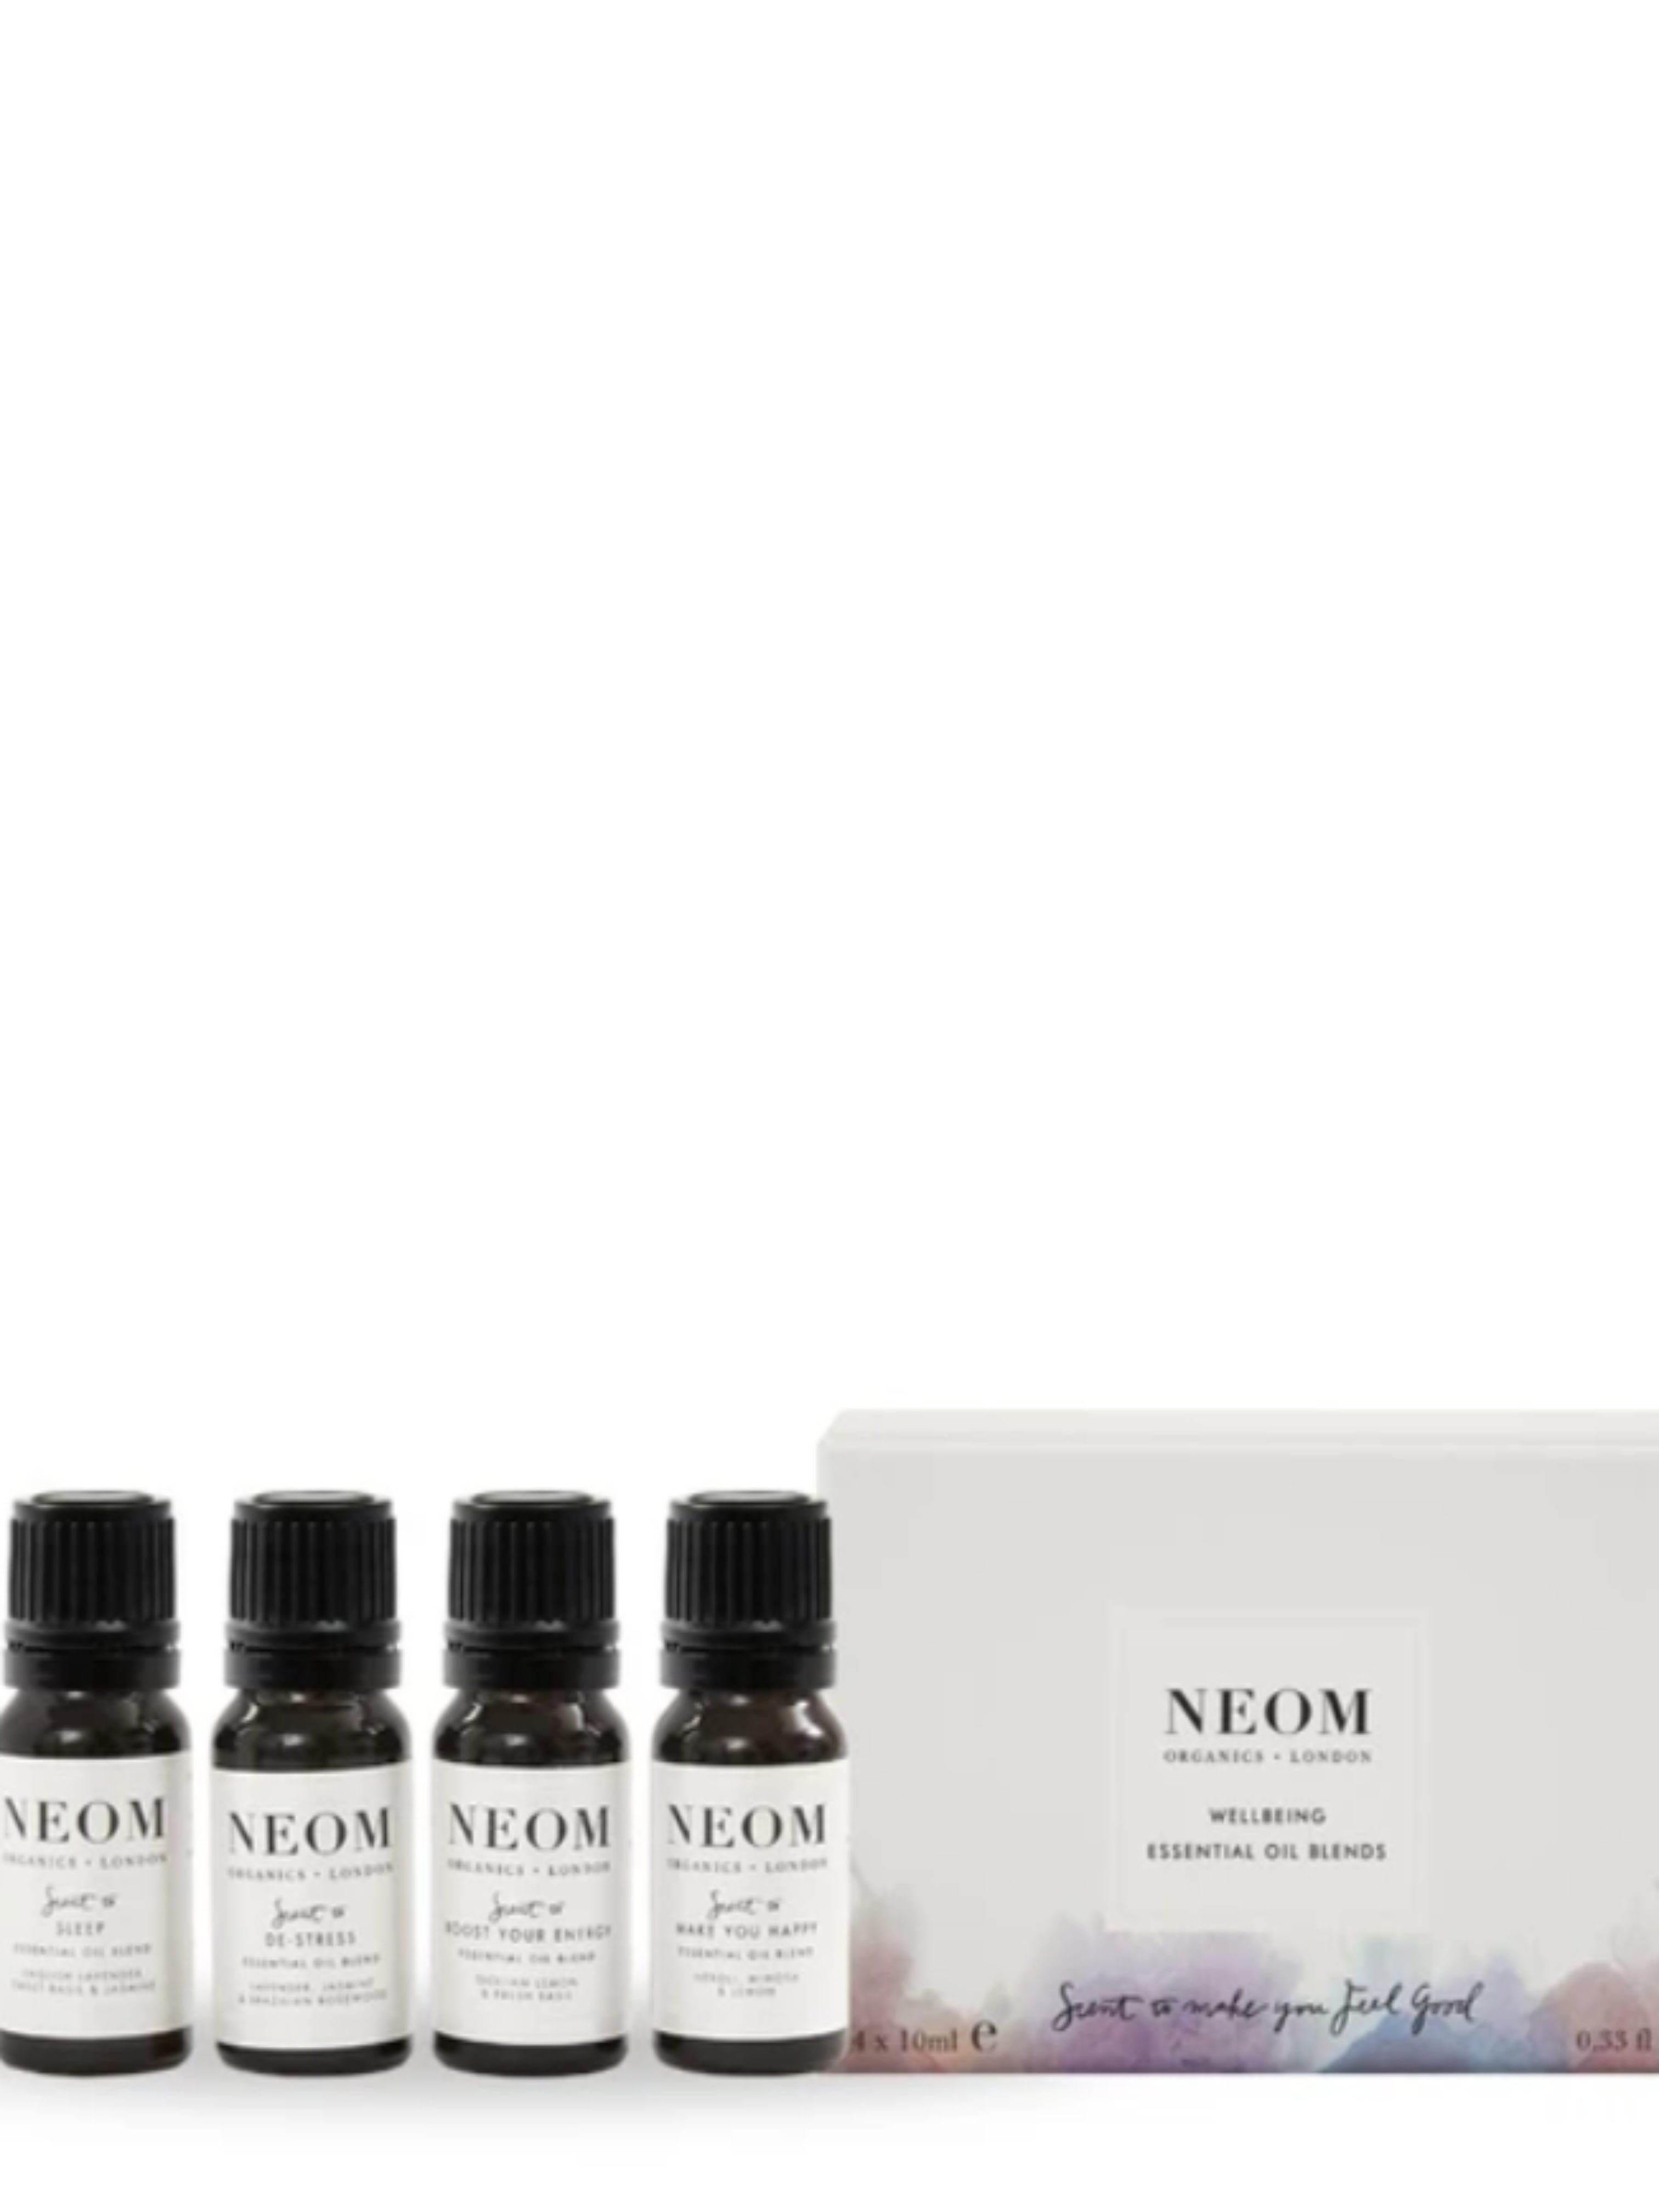 NEOM Wellbeing Essential Oil Blends Collection